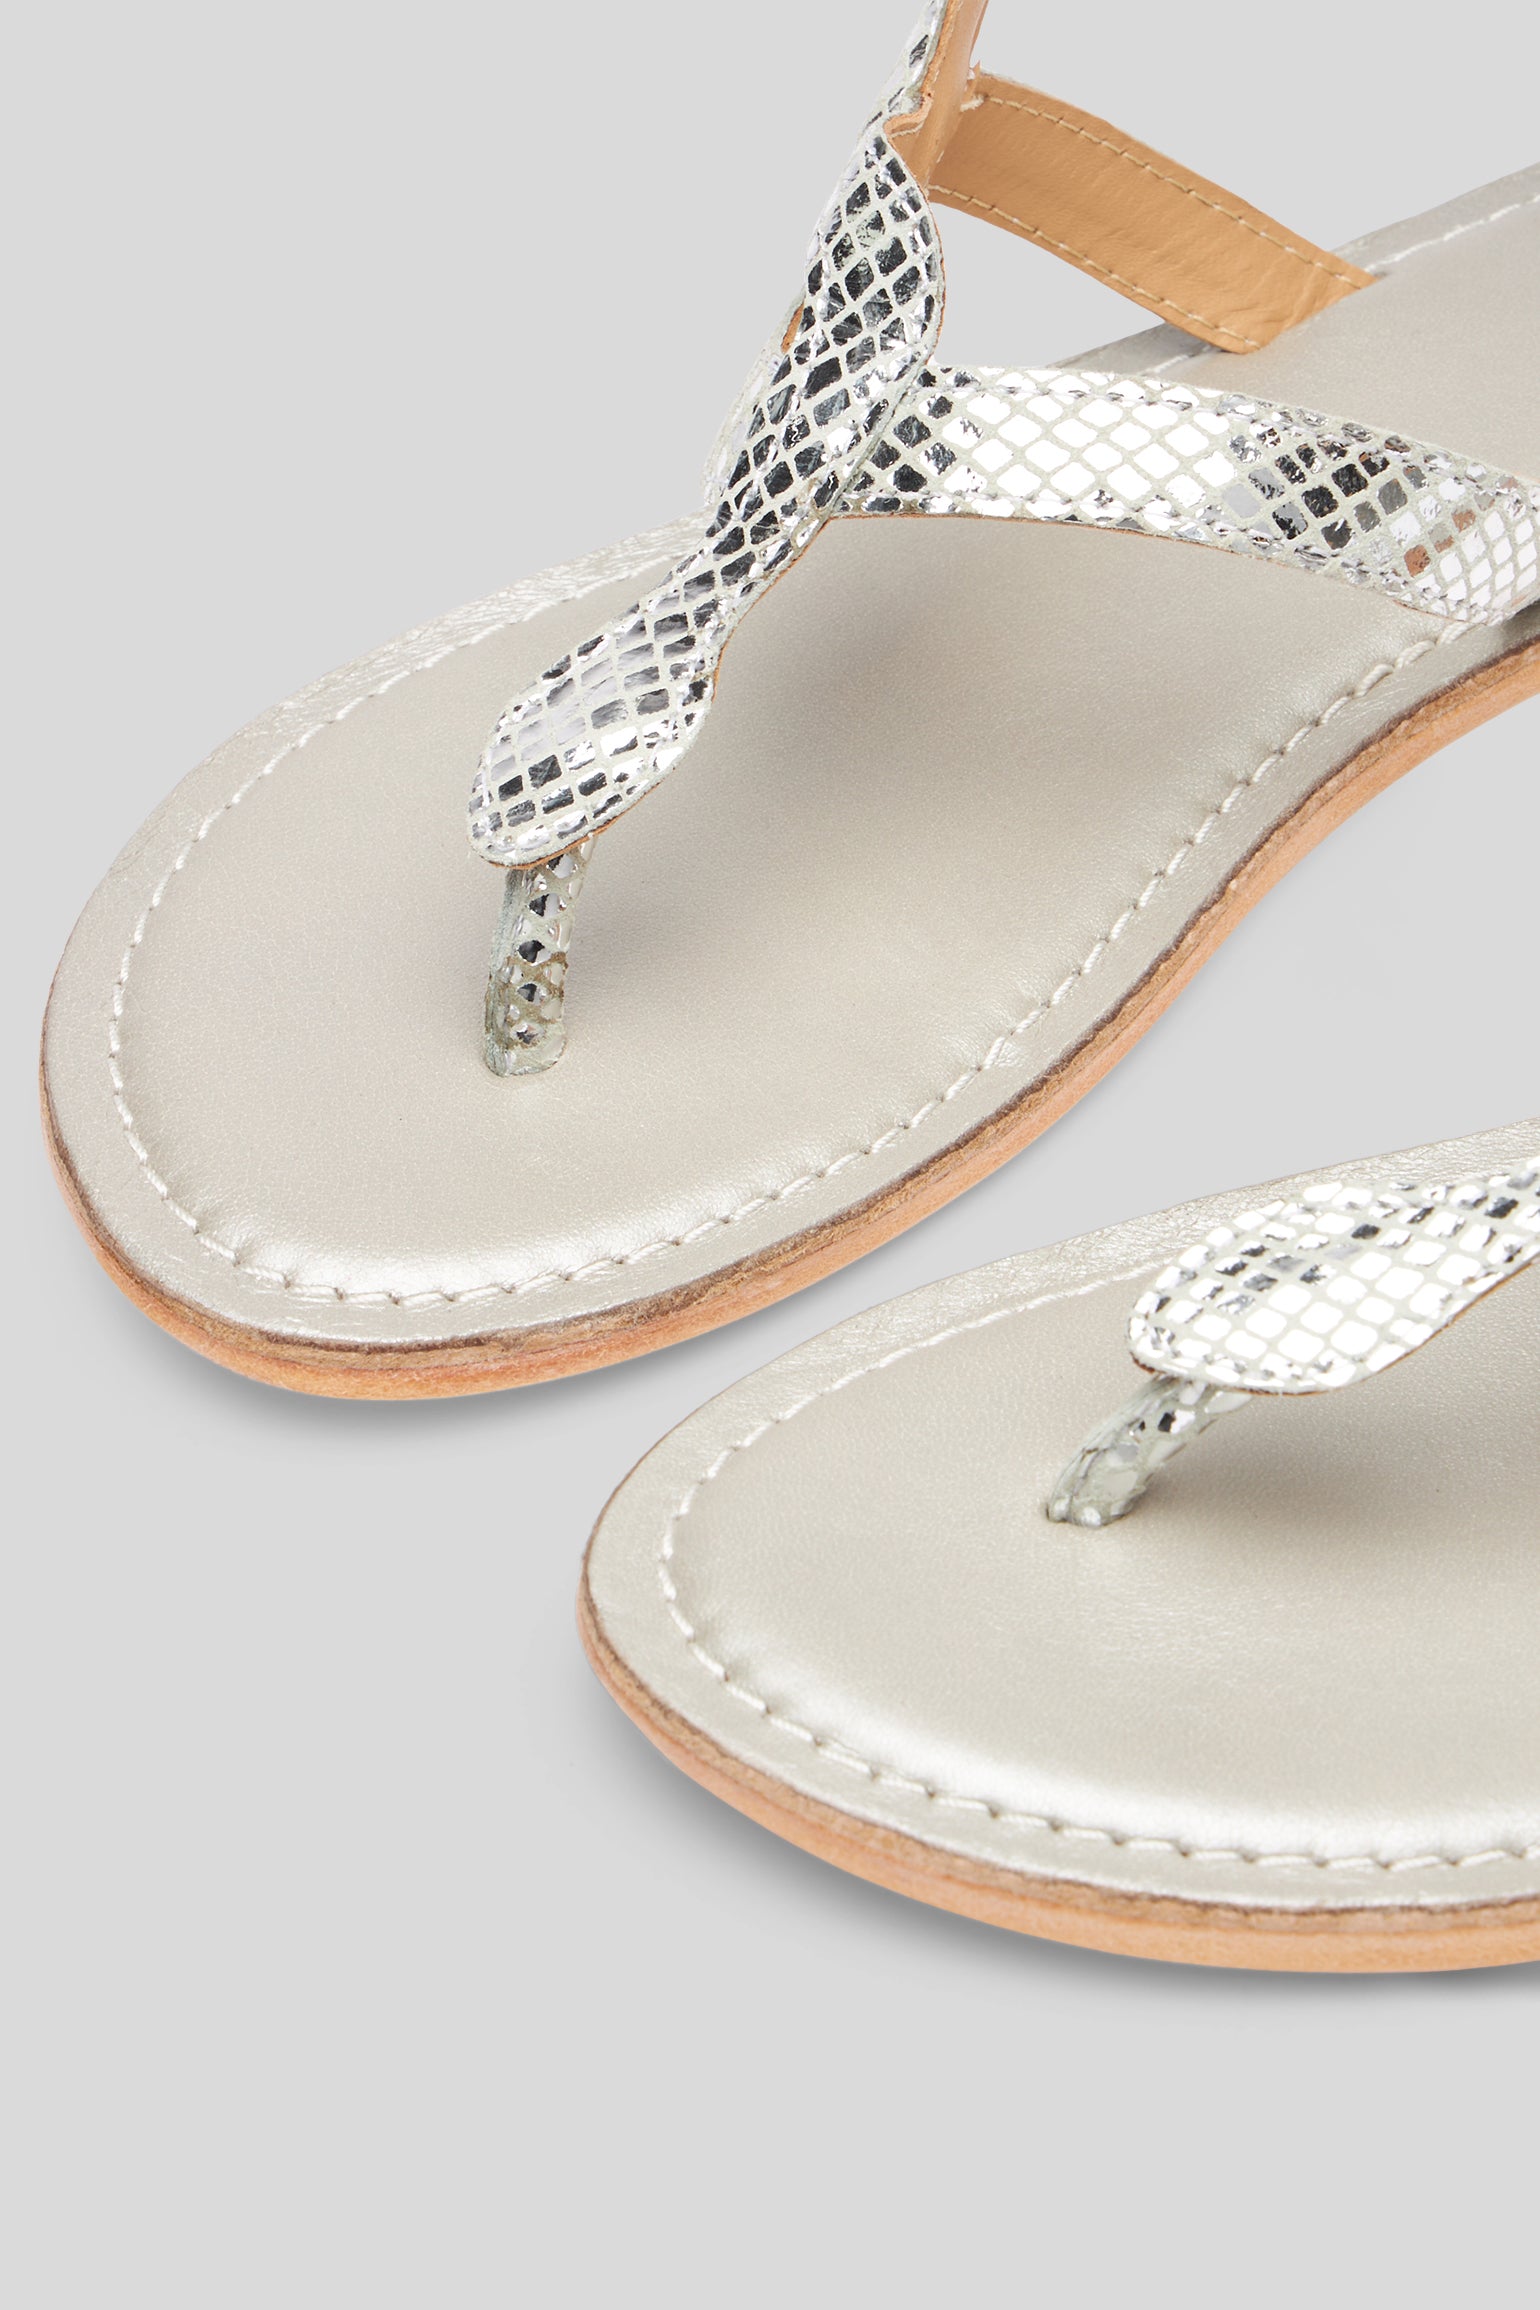 CB FUSION Wrap Up Sandals in Silver Laminated Leather